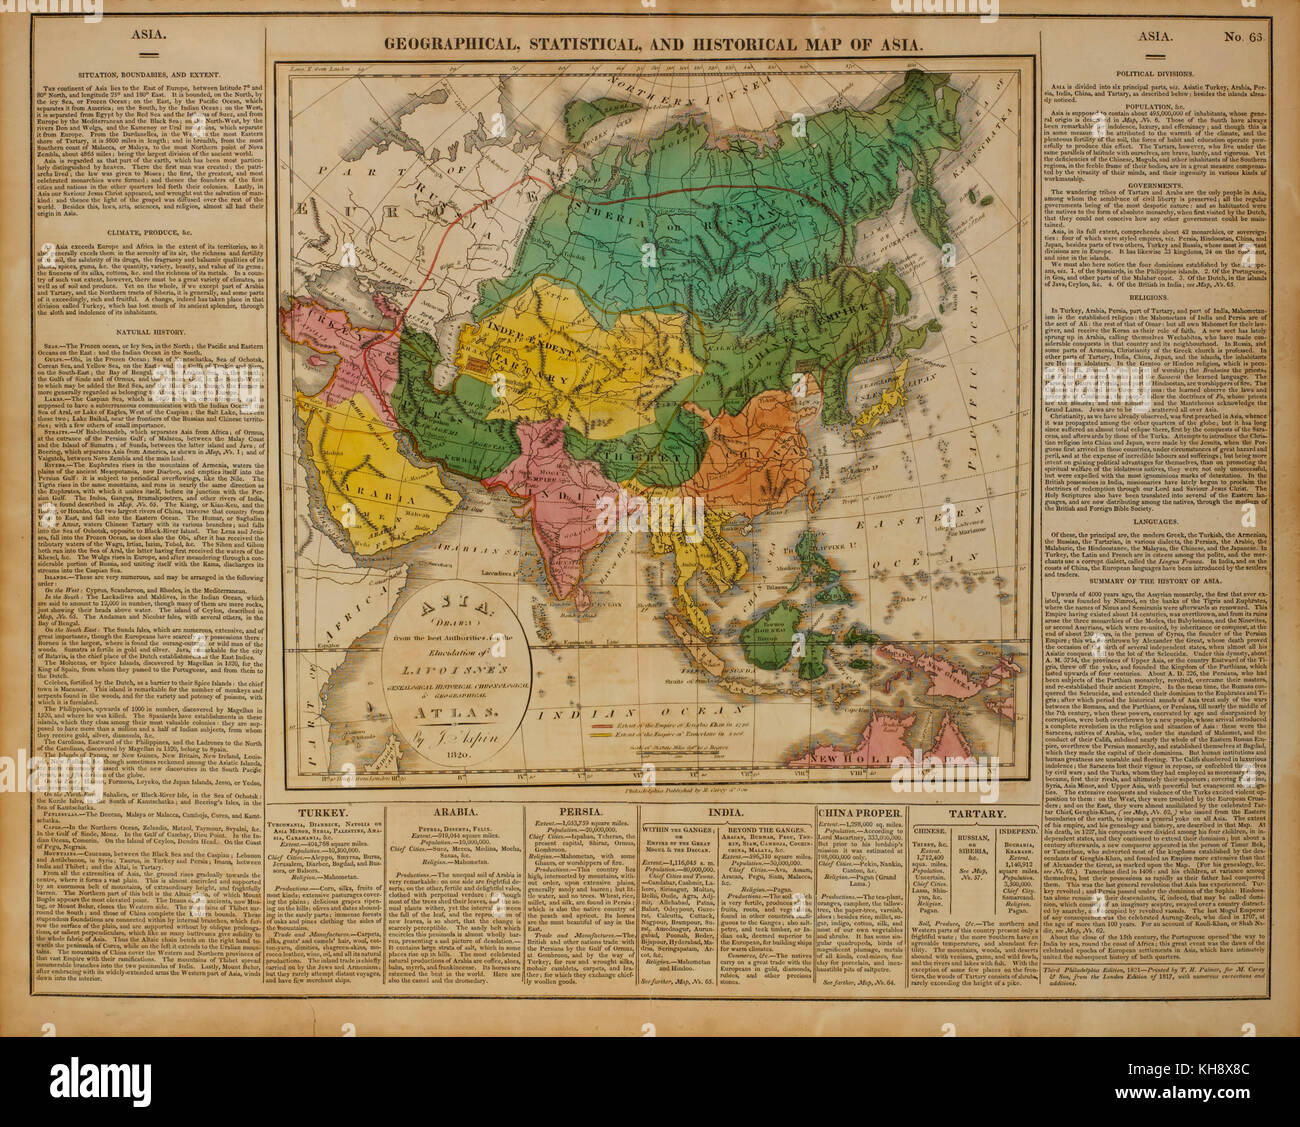 Geographical, Statistical and Historical Map of Asia, 1820 Stock Photo